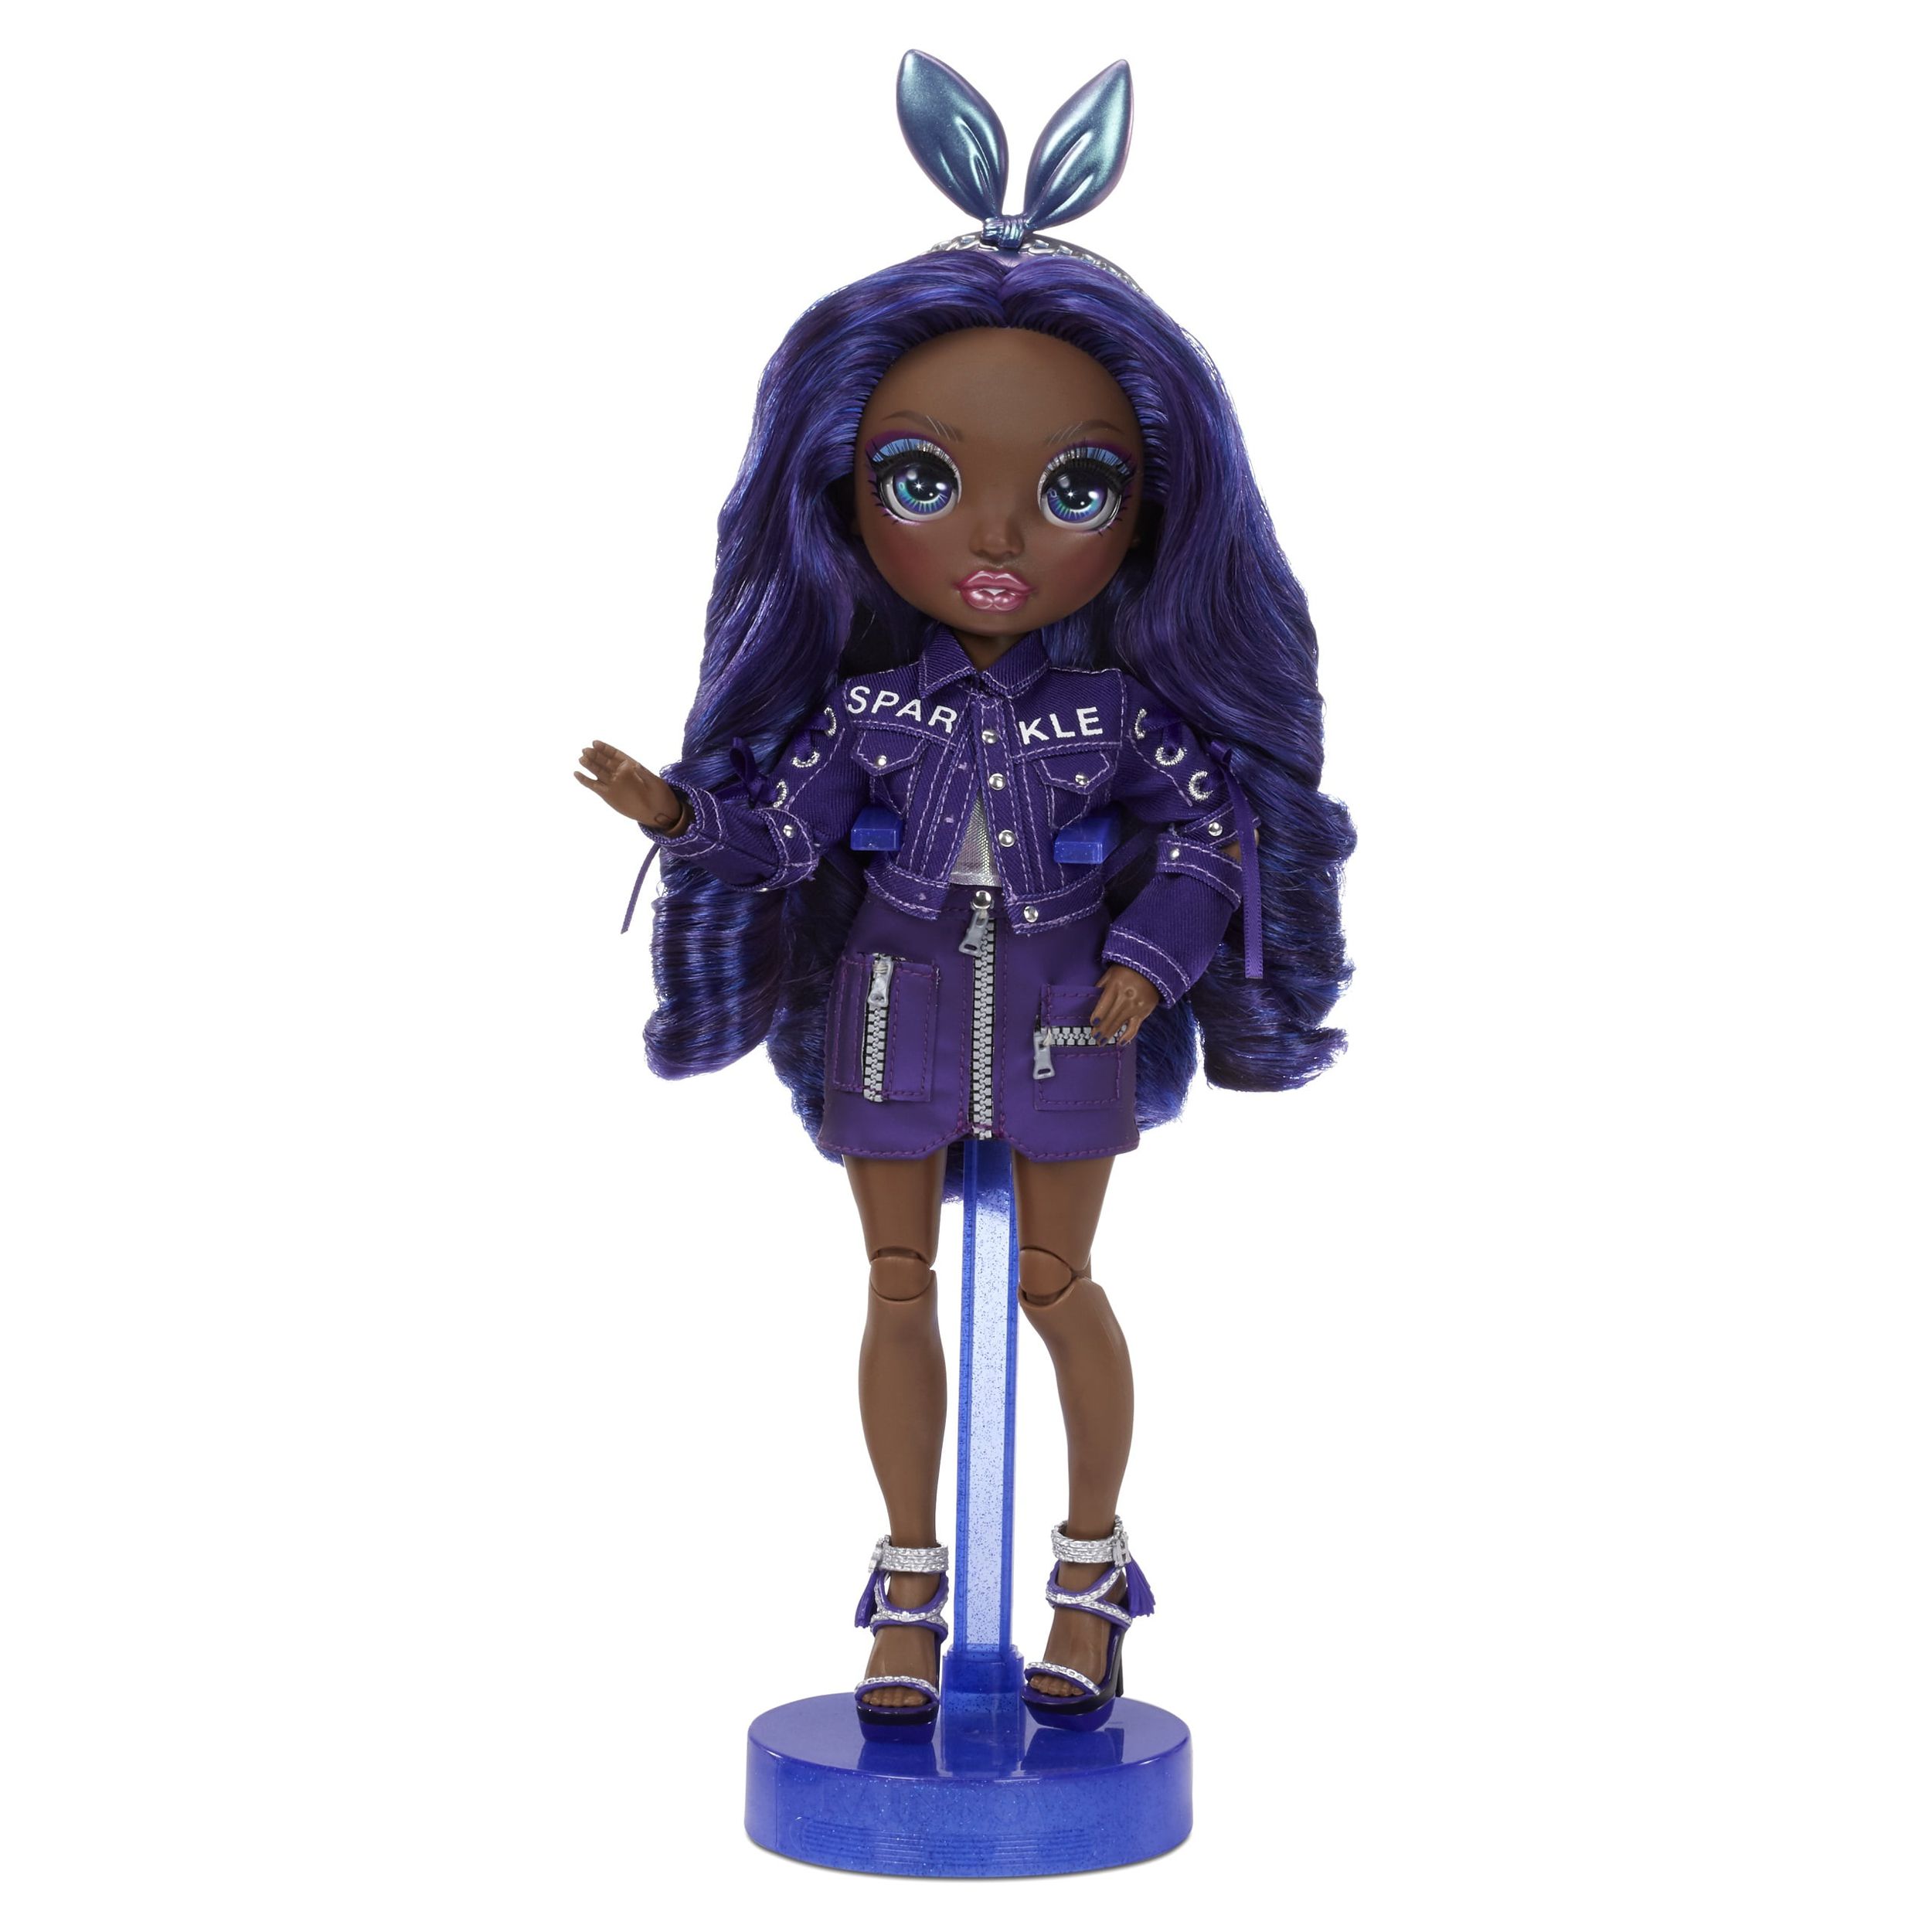 Rainbow High Krystal Bailey – Indigo (Dark Blue Purple) Fashion Doll With 2 Complete Mix & Match Outfits And Accessories, Toys for Kids 6-12 Years Old - image 5 of 8